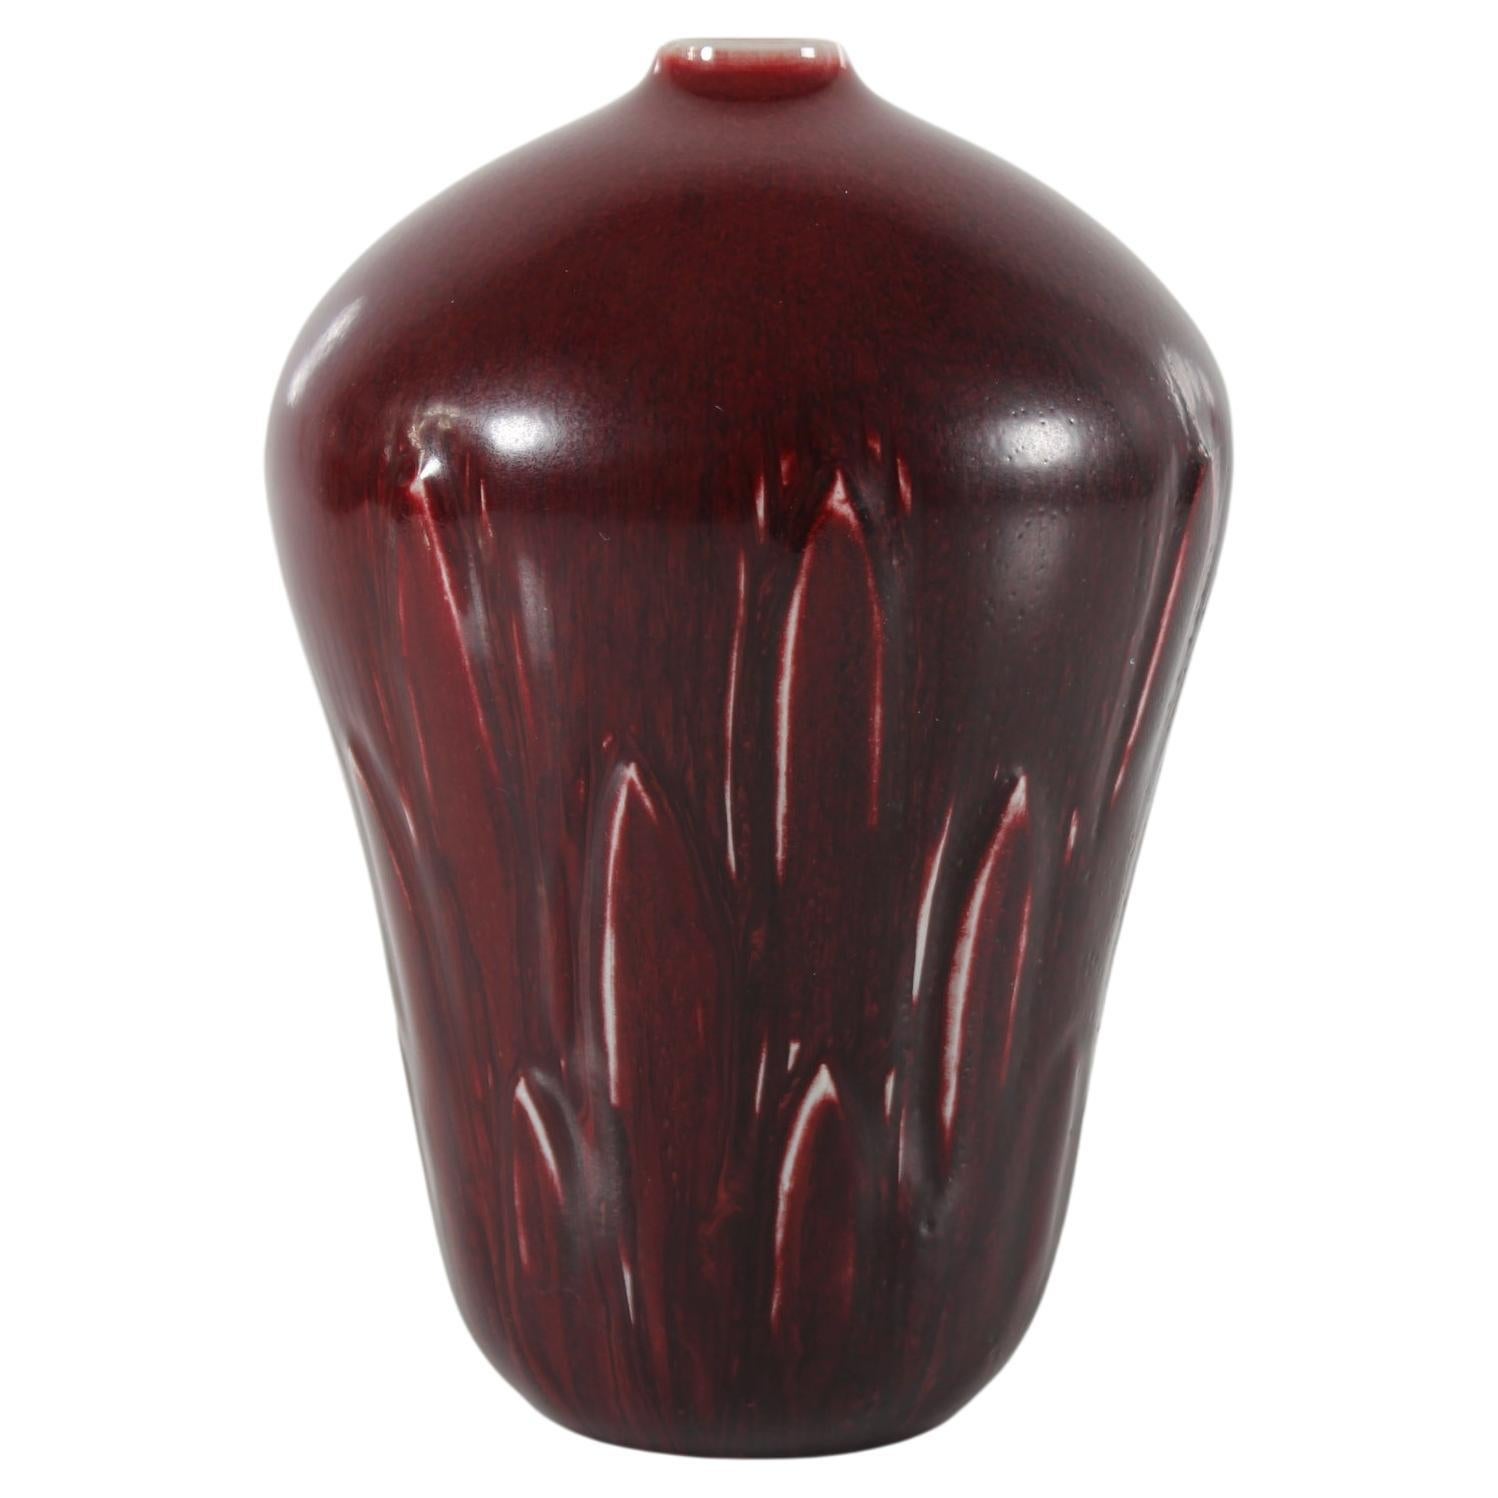 Large vase by Danish ceramist Gerd Bøgelund (1923-1987) for Royal Copenhagen Denmark. 
It's made of stoneware in the 1960s. 

The vase is decorated with an incised leaf ornamentation and covered in oxblood glaze.

Sign. with monogram for Gerd